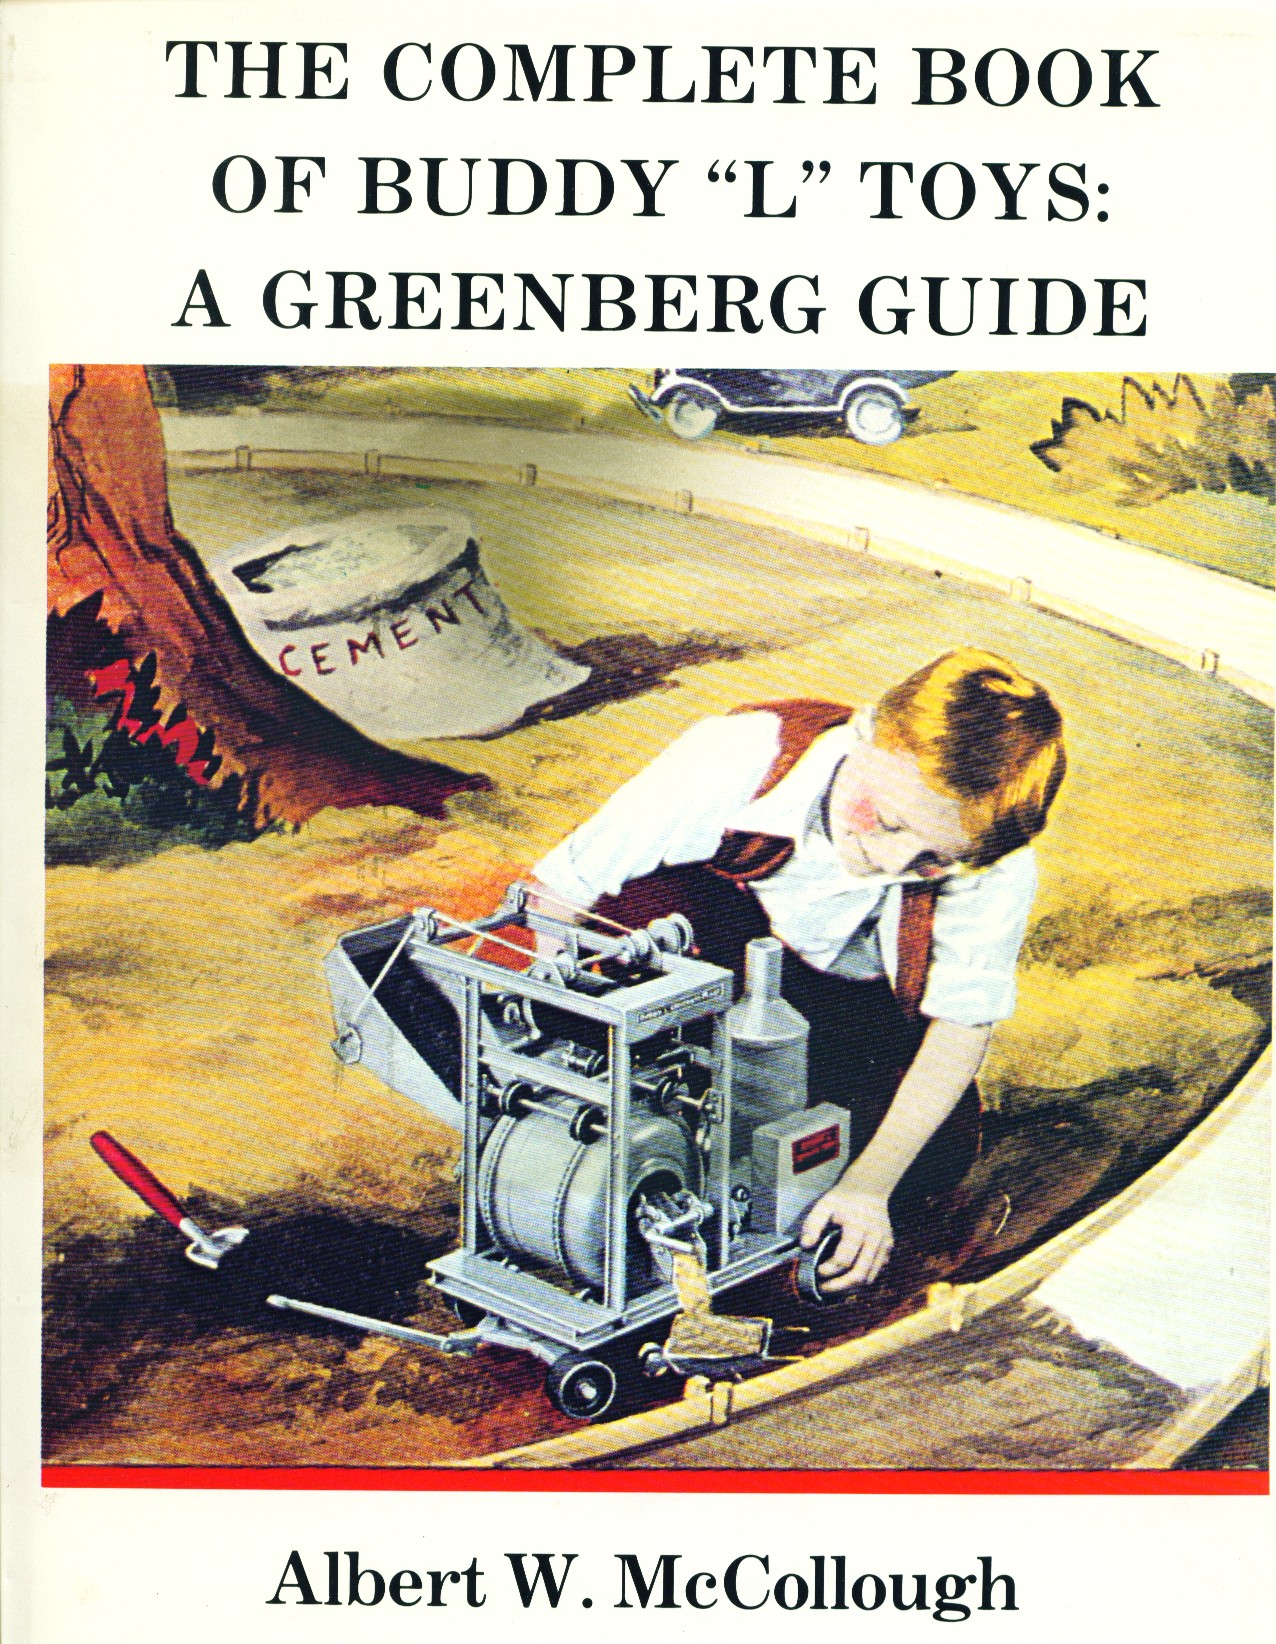 Complete book of Buddy L toys: A Greenberg guide